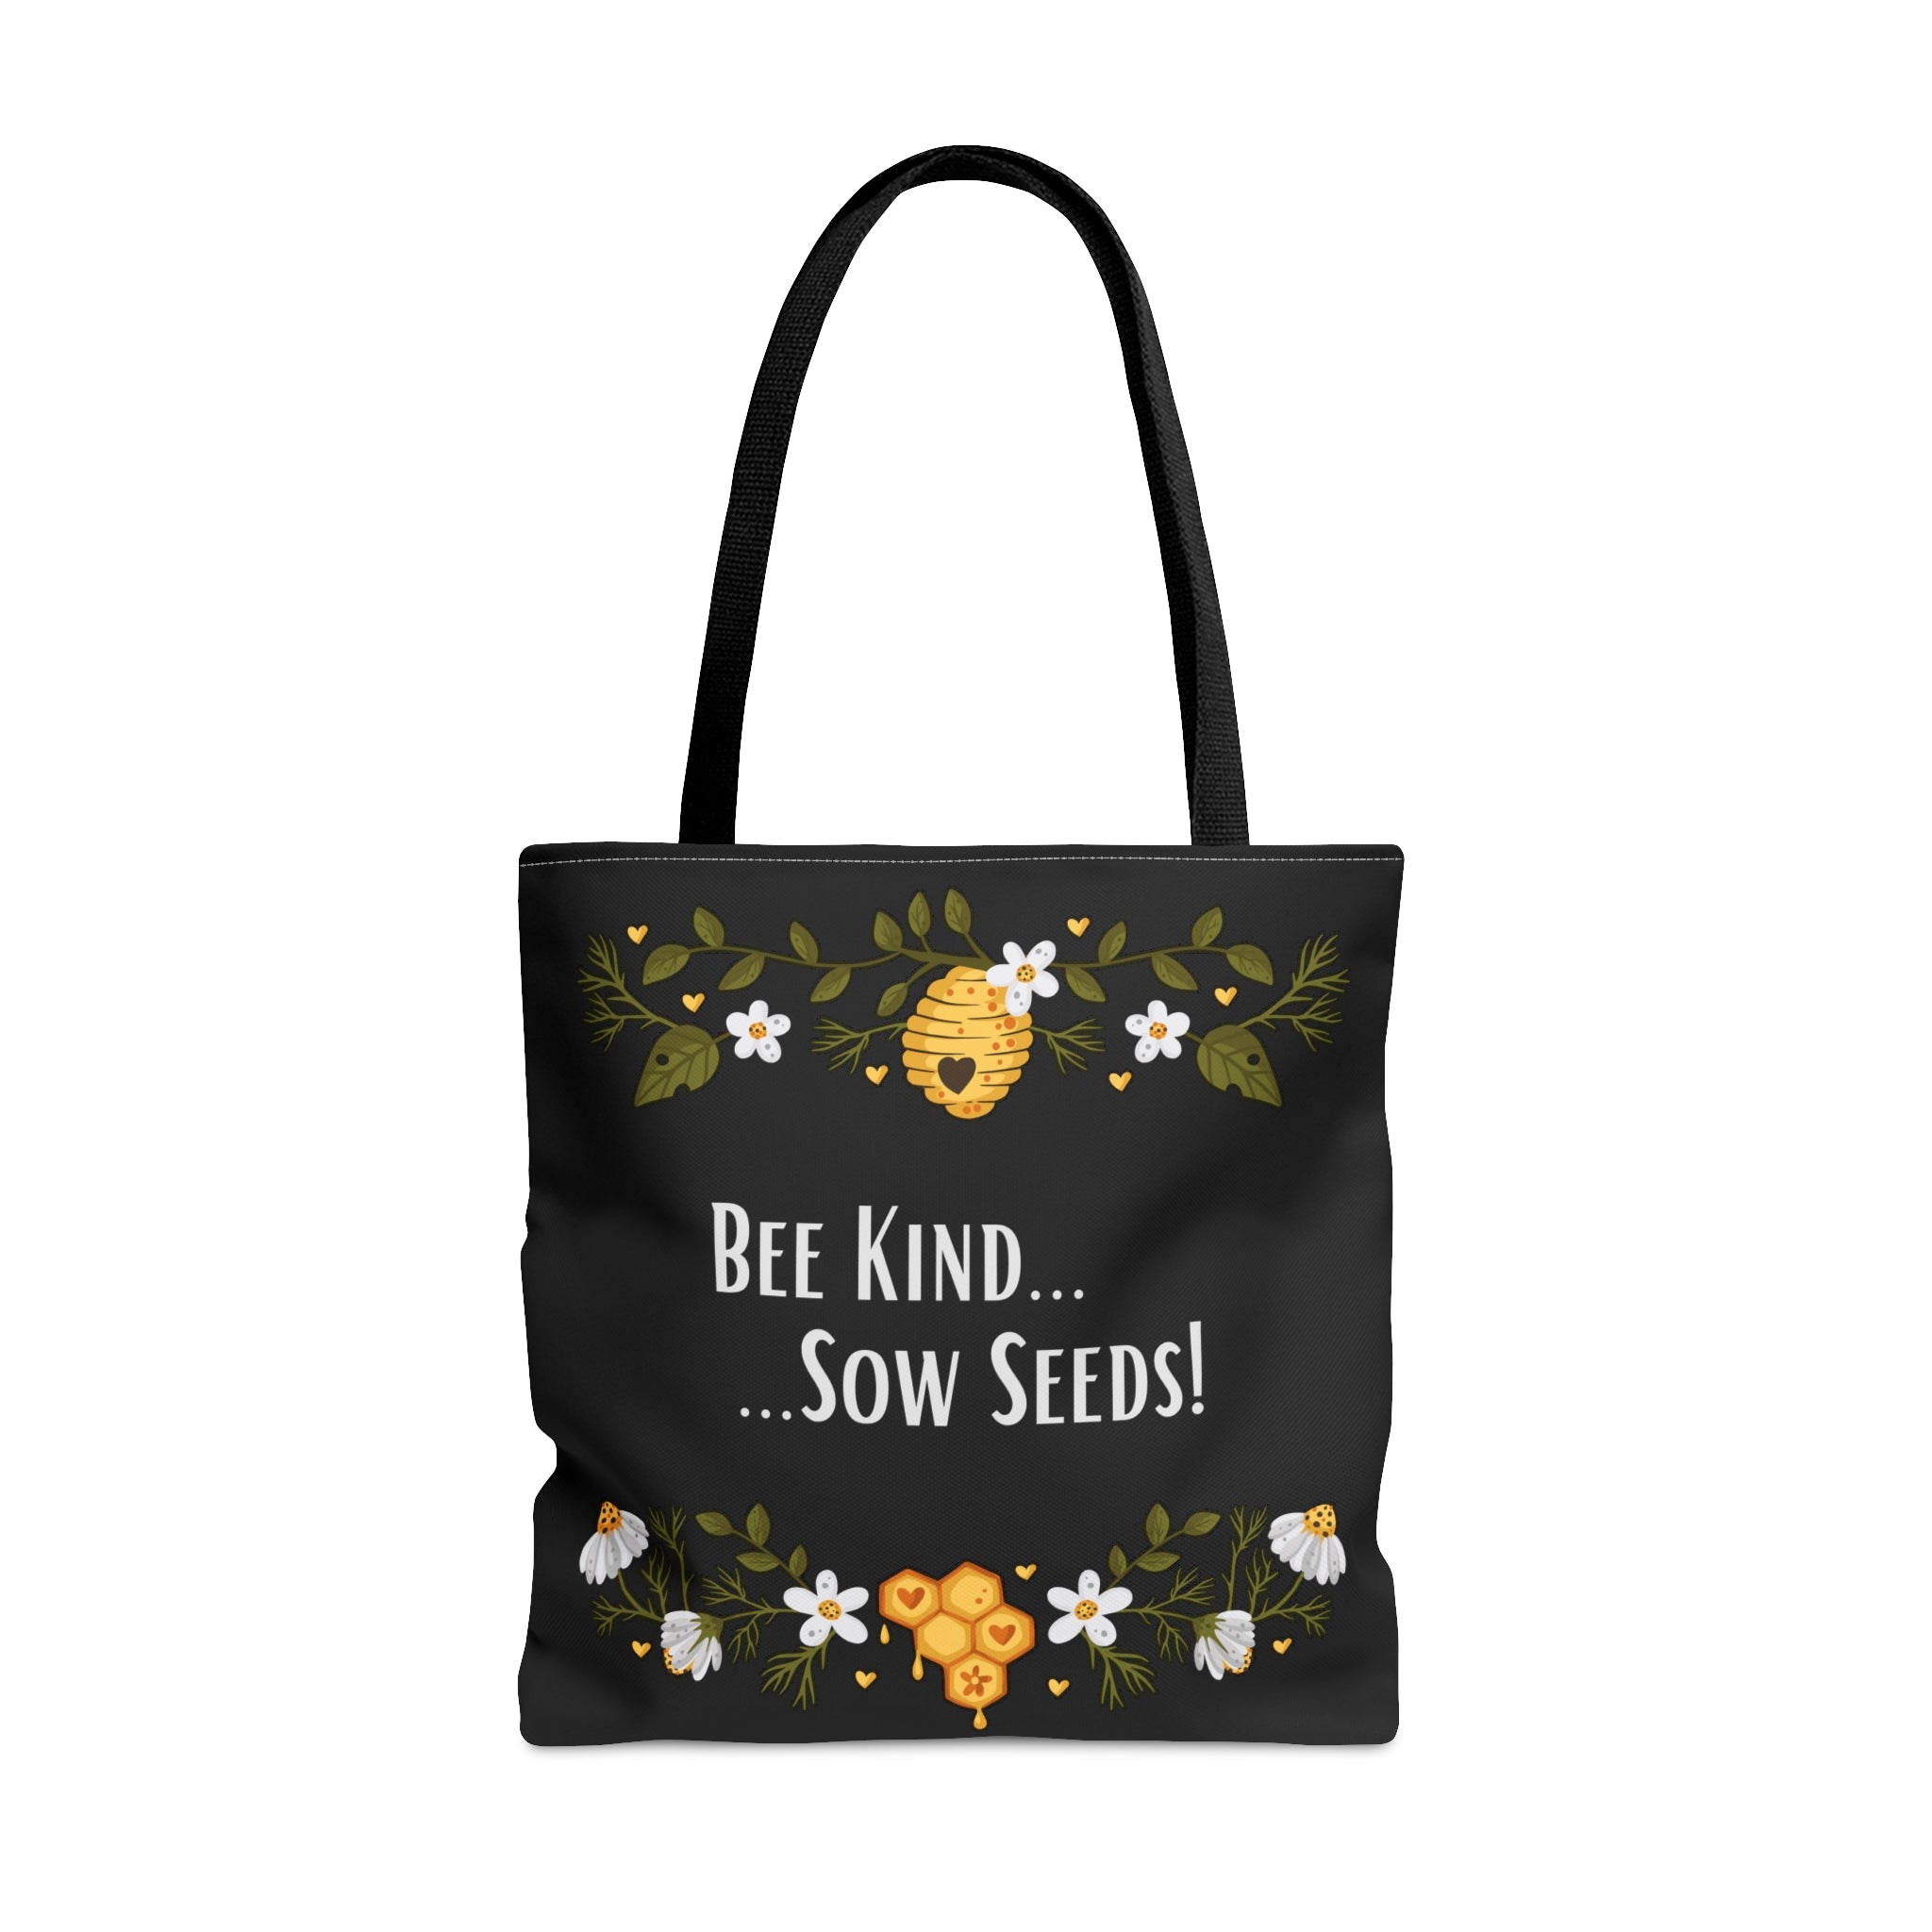 Black tote with flowers, beehives, and bees with the phrase "Bee Kind...Sow Seeds!"